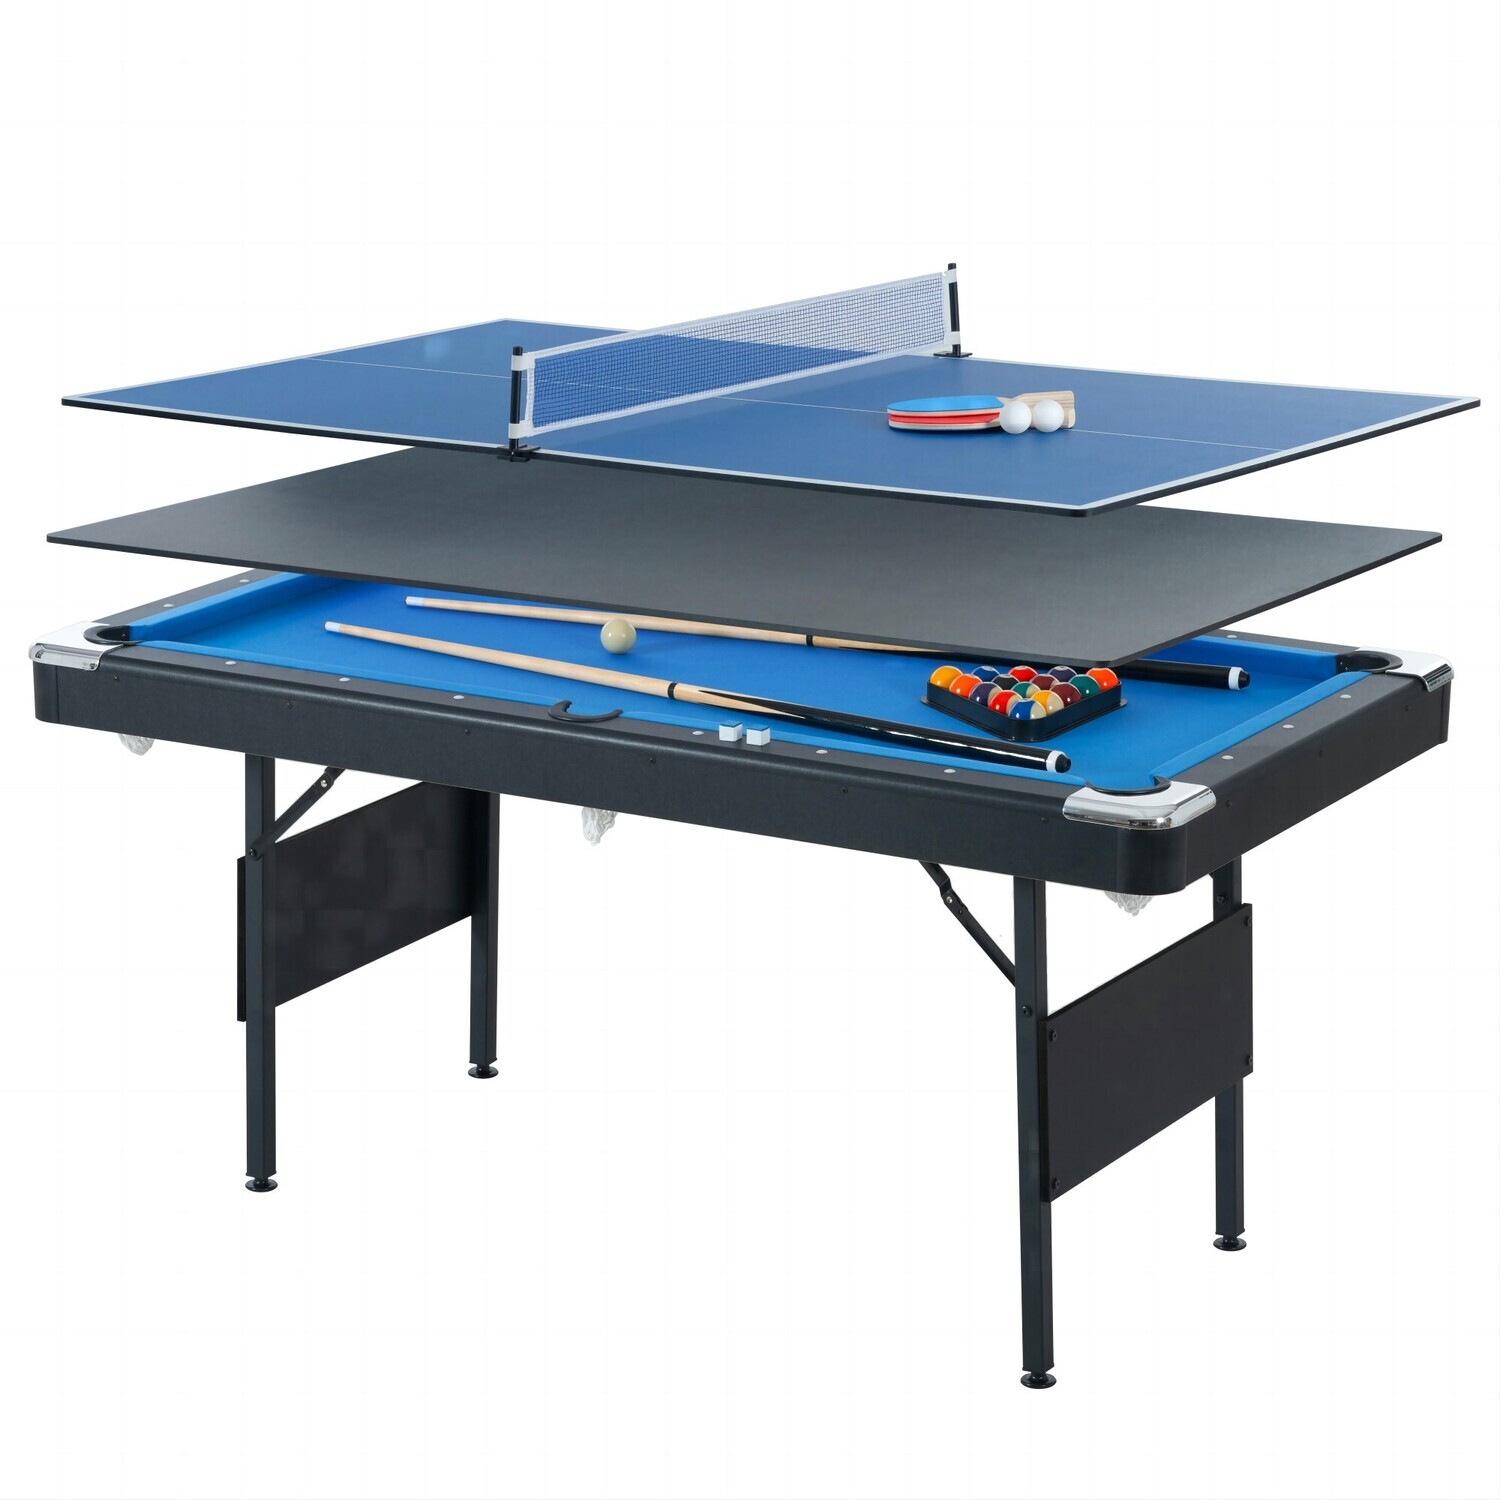 3-in-1 Game Table, Pool Table, Billiard Table, Table Games, Table Tennis, Multi-Game Table, Table Games, Family Interaction, Options: Balls Sports+Black+Blue+Portable+Primary Living Space+American Design,European+Multifunctional+MDF+MDF+Steel